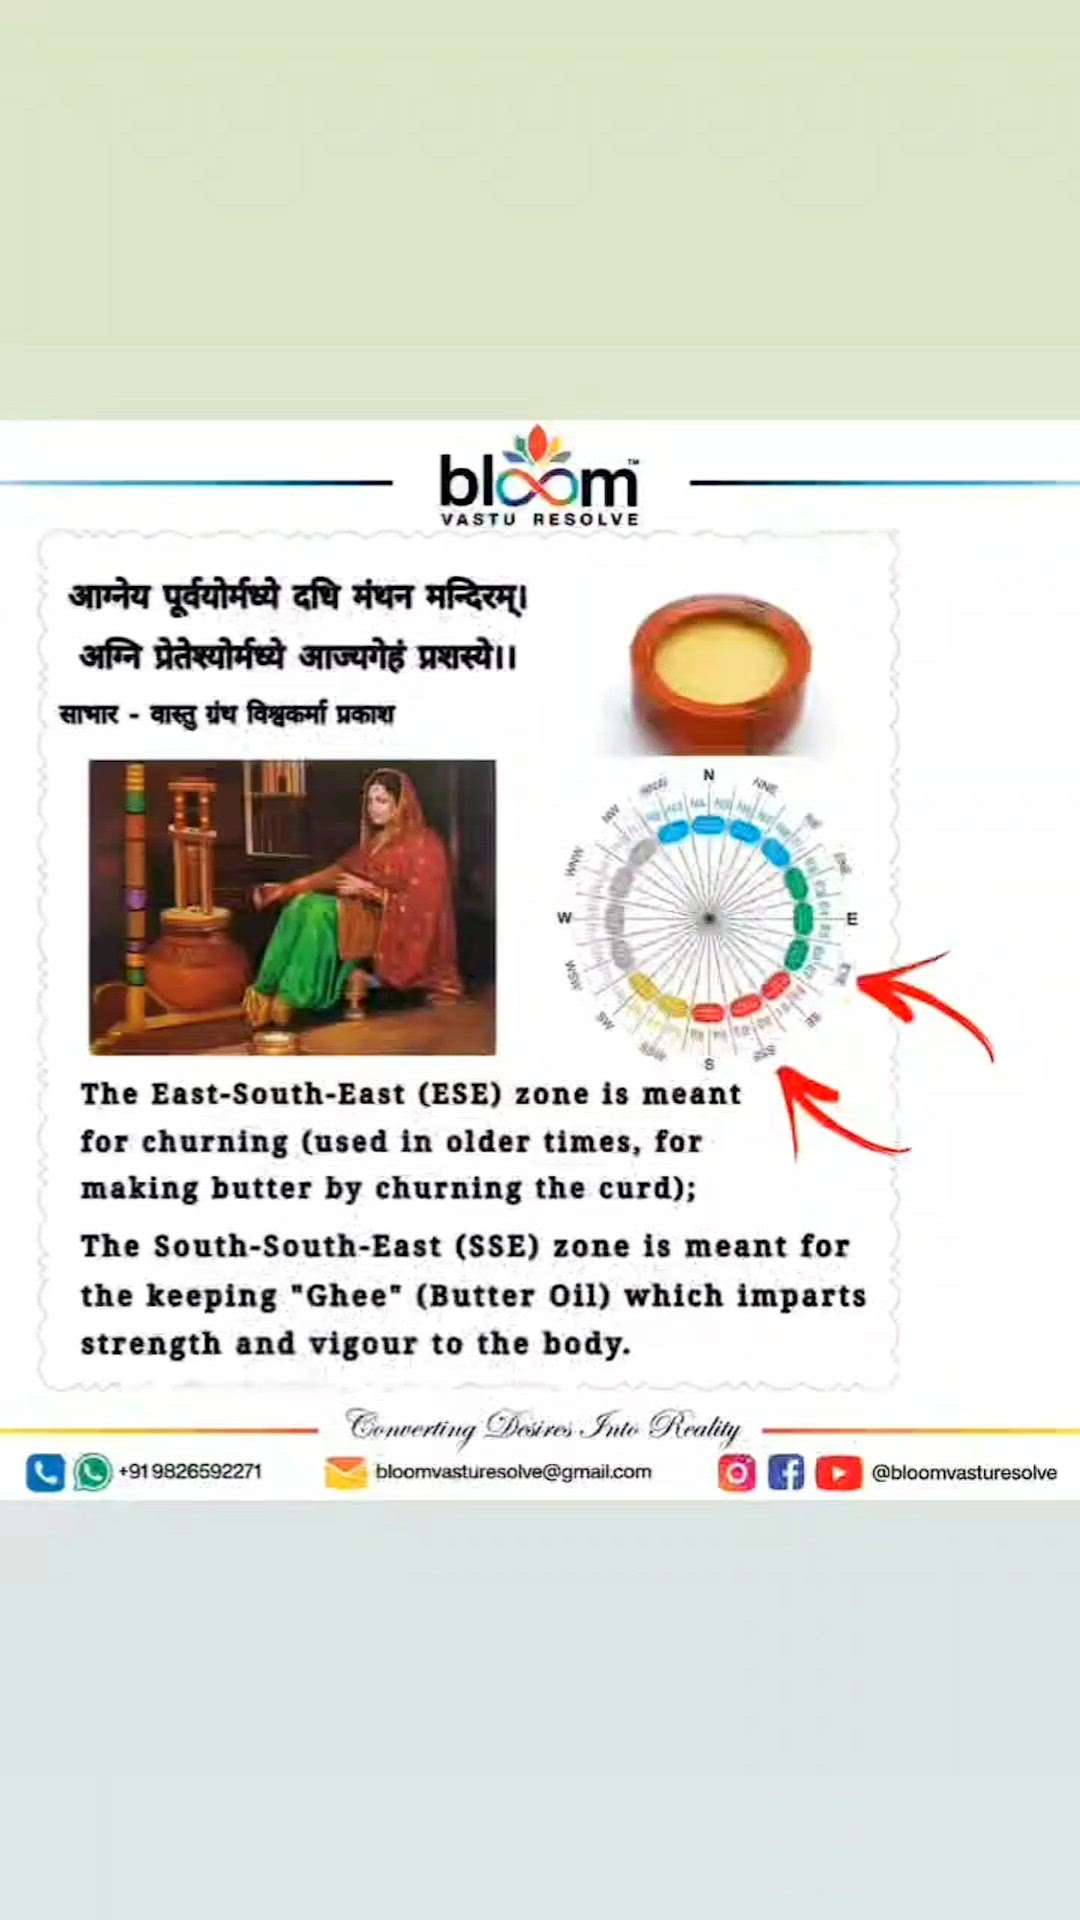 Your queries and comments are always welcome.
For more Vastu please follow @bloomvasturesolve
on YouTube, Instagram & Facebook
.
.
For personal consultation, feel free to contact certified MahaVastu Expert through
M - 9826592271
Or
bloomvasturesolve@gmail.com
#vastu #वास्तु #mahavastu #mahavastuexpert #bloomvasturesolve  #vastureels #vastulogy #vastuexpert  #vasturemedies  #vastuforhome #vastuforpeace #vastudosh #numerology #vastuforgrowth #anxiety #esezone #ssezone